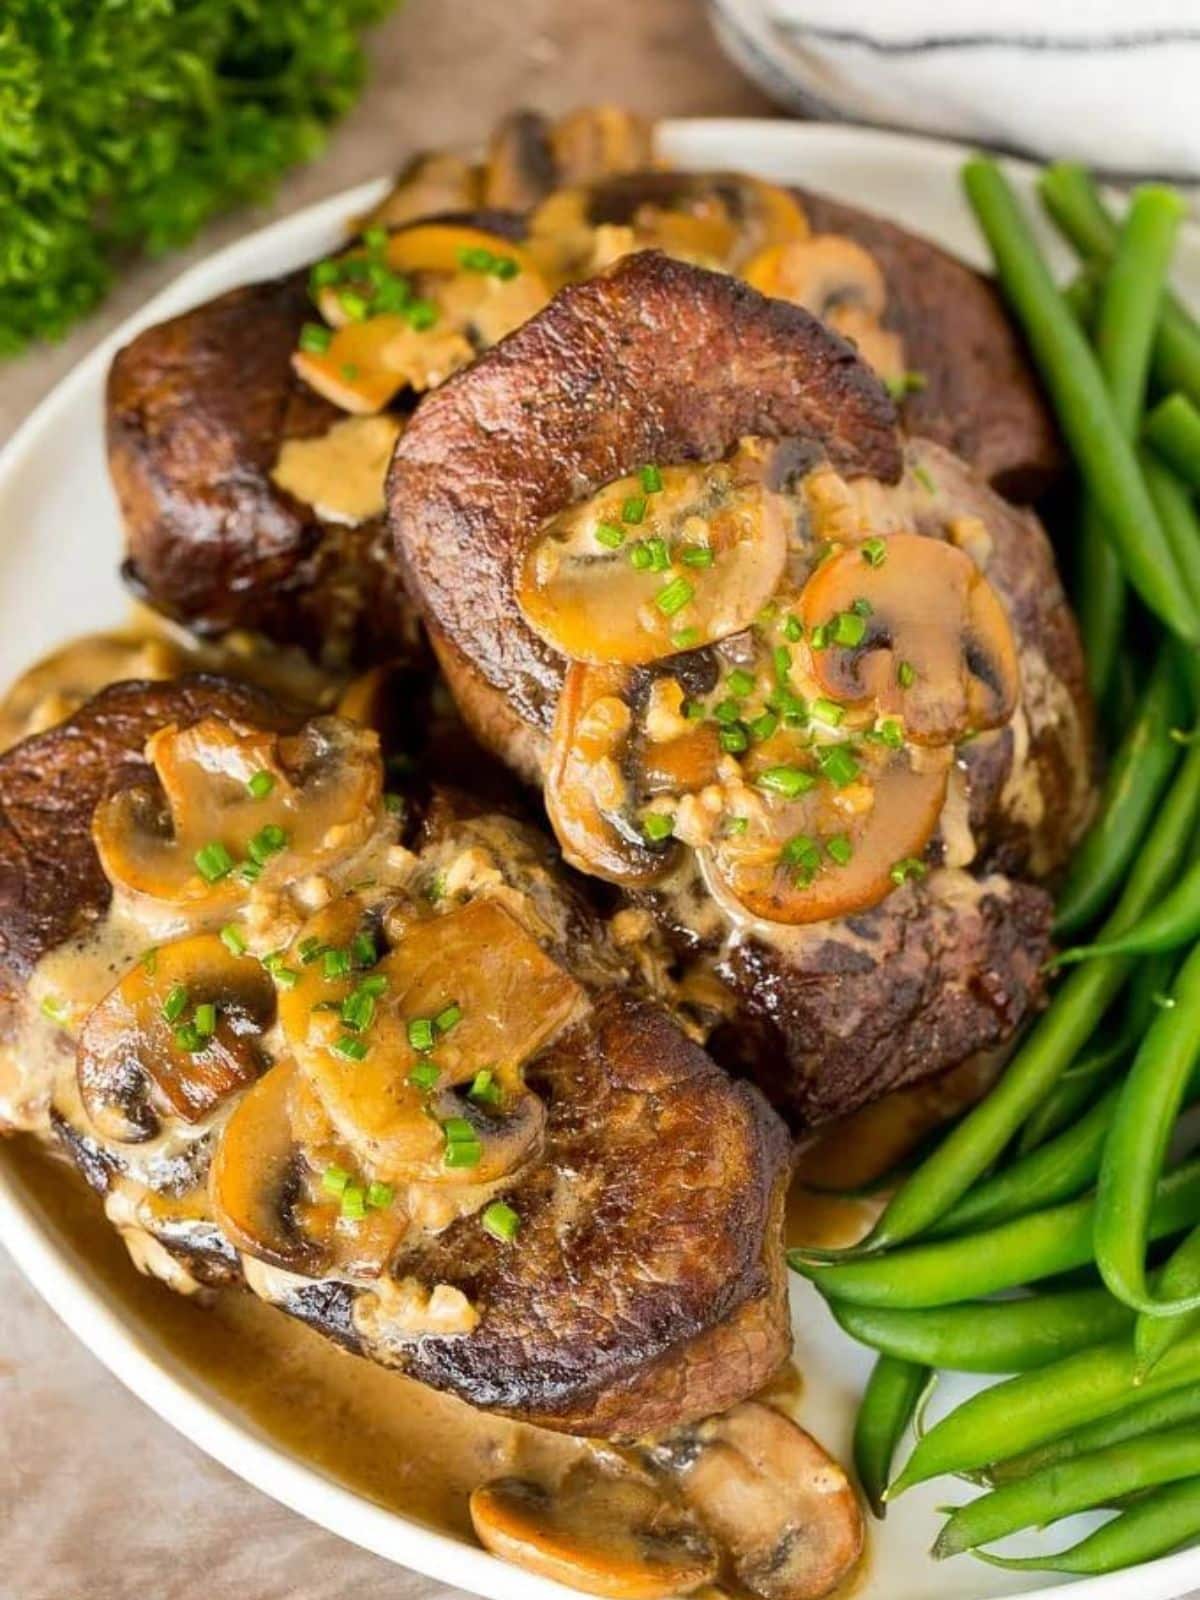 steak with mushrooms and green beans.